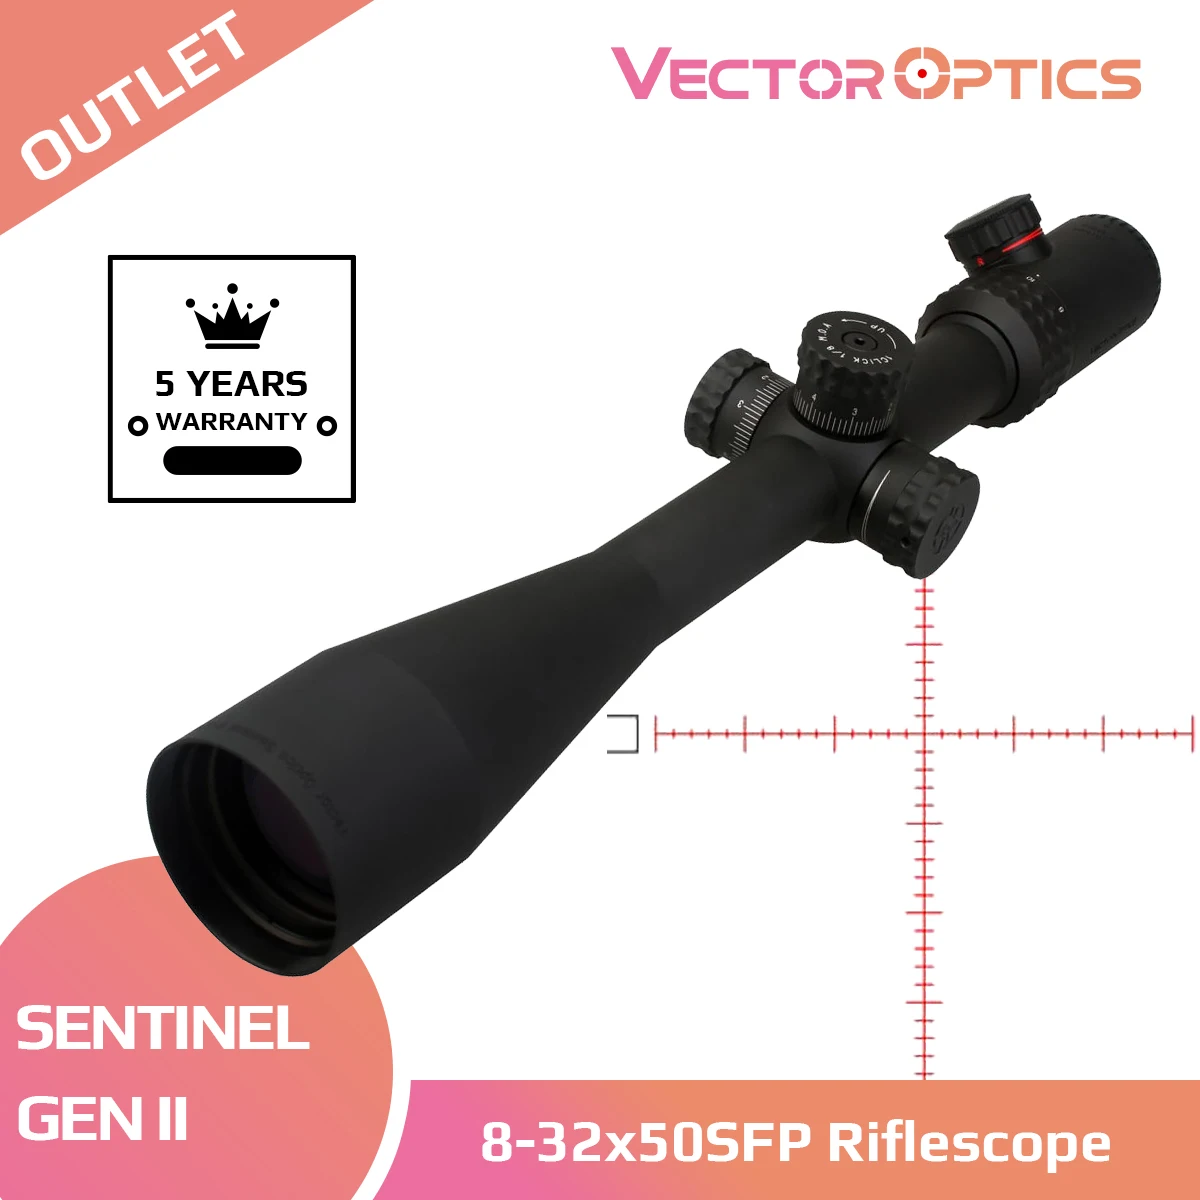 

Vector Optics Sentinel 8-32x50 Riflescope Tactical Target Shooting 50mm Rifle Scope Tested on Real Firearms Airgun Shock Proof